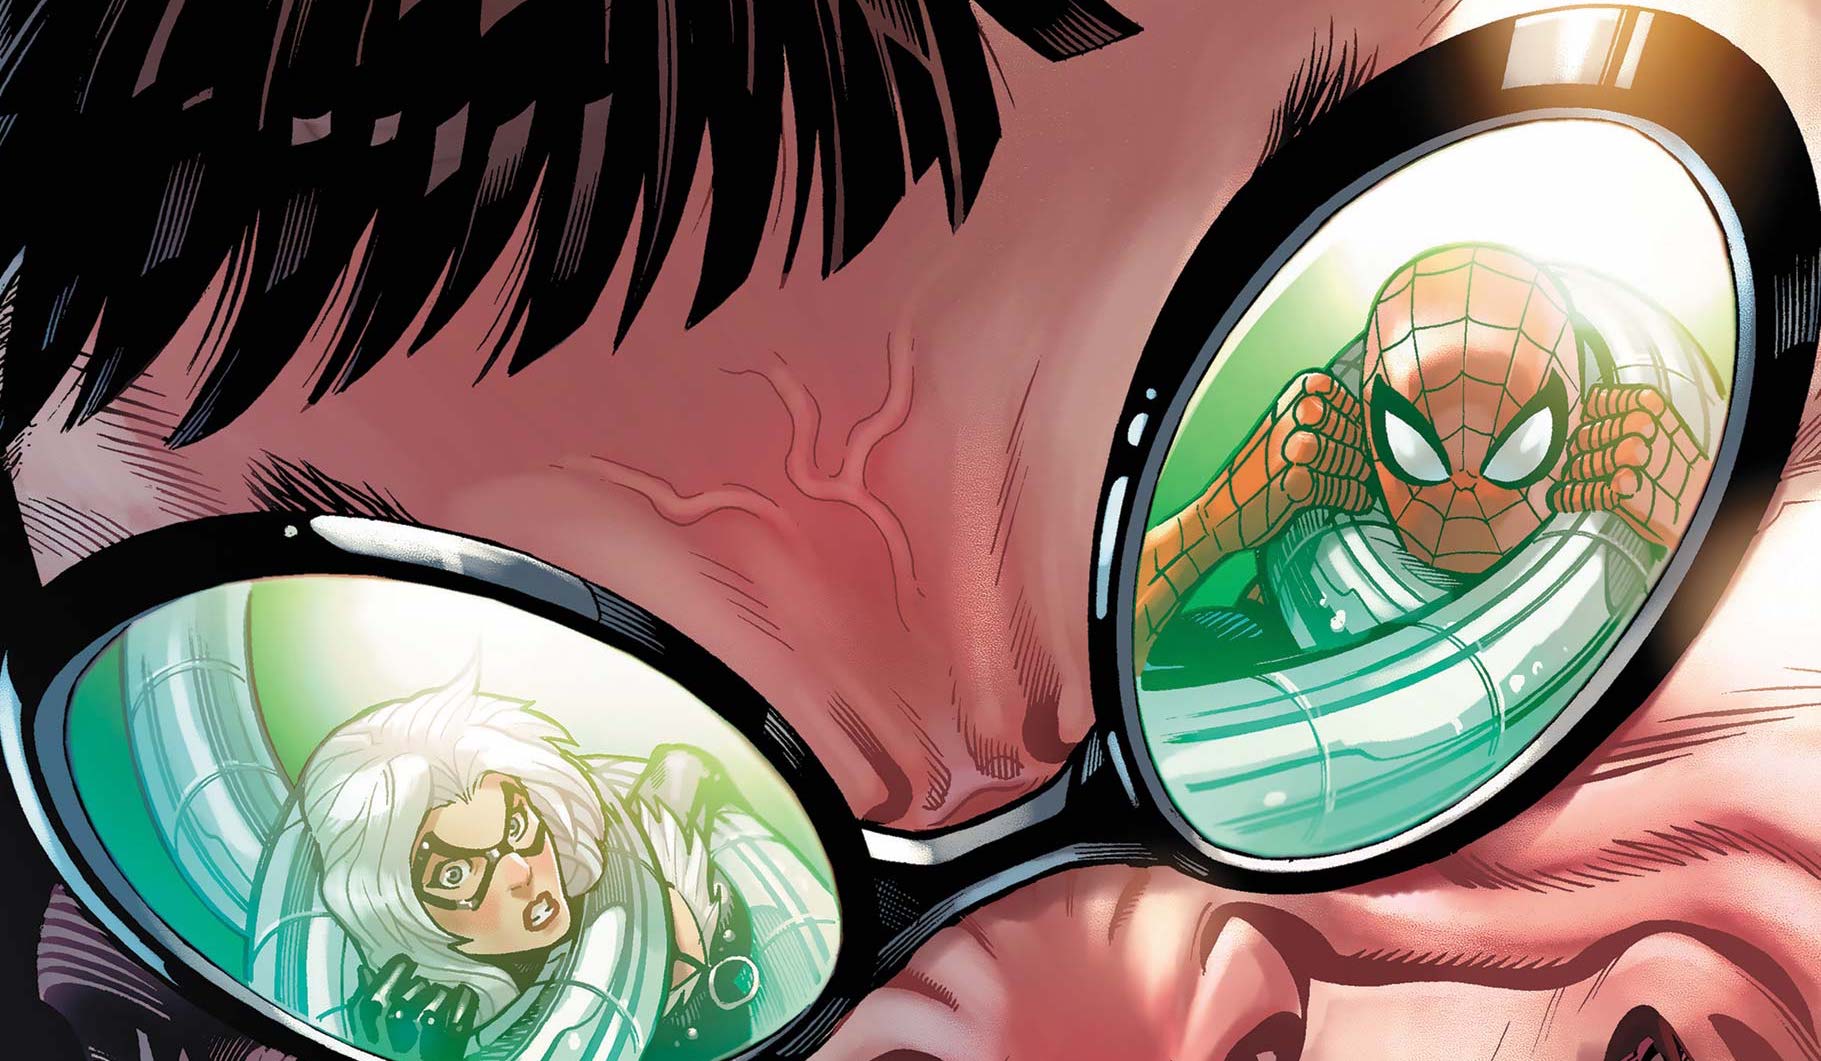 'The Amazing Spider-Man' #27 sets up Doc Ock in a new way